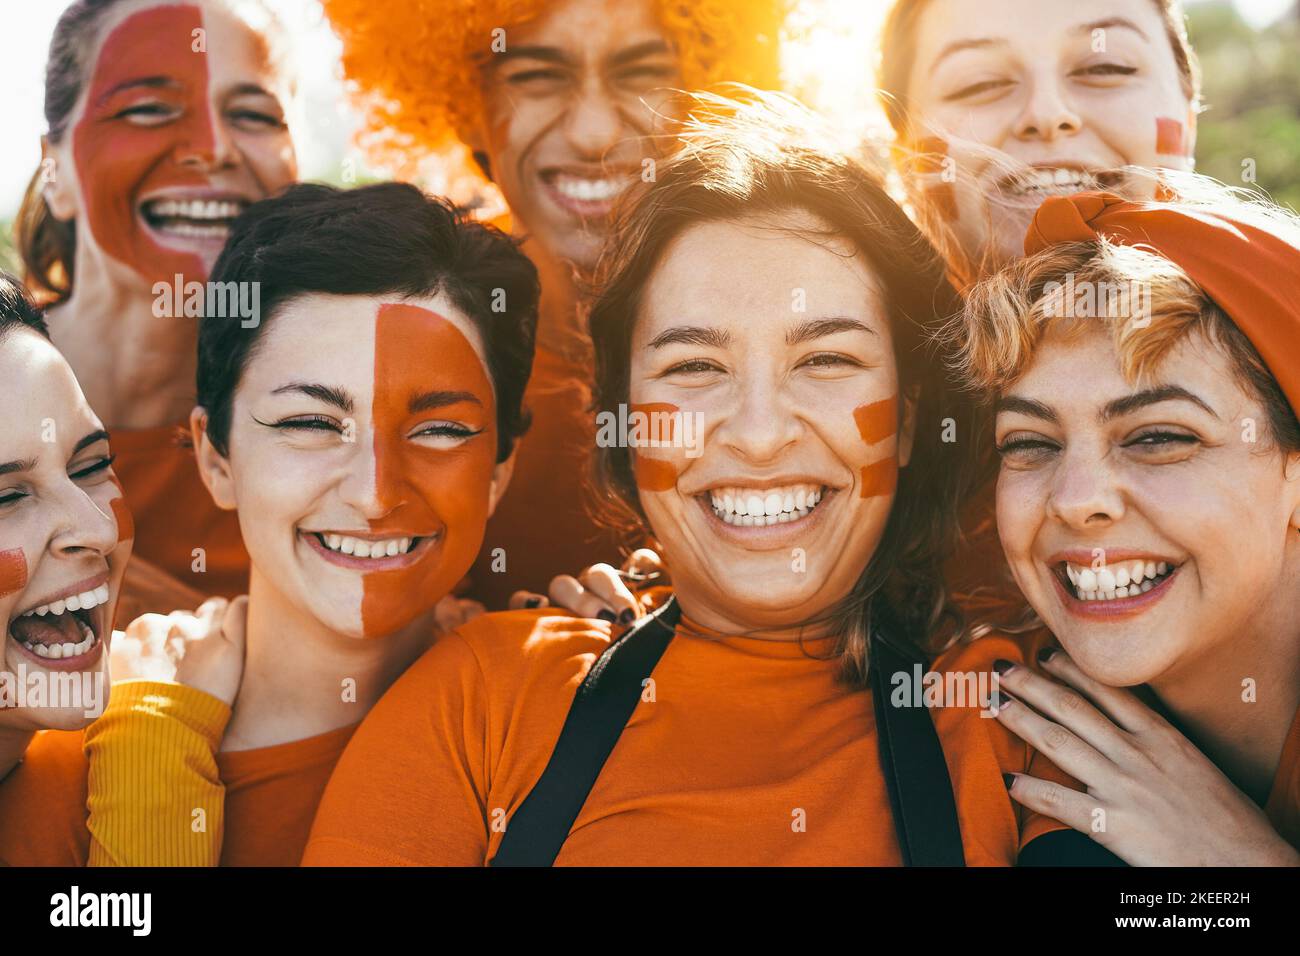 Orange sport fans screaming while supporting their team - Football supporters having fun at competition event - Focus on center girl face Stock Photo